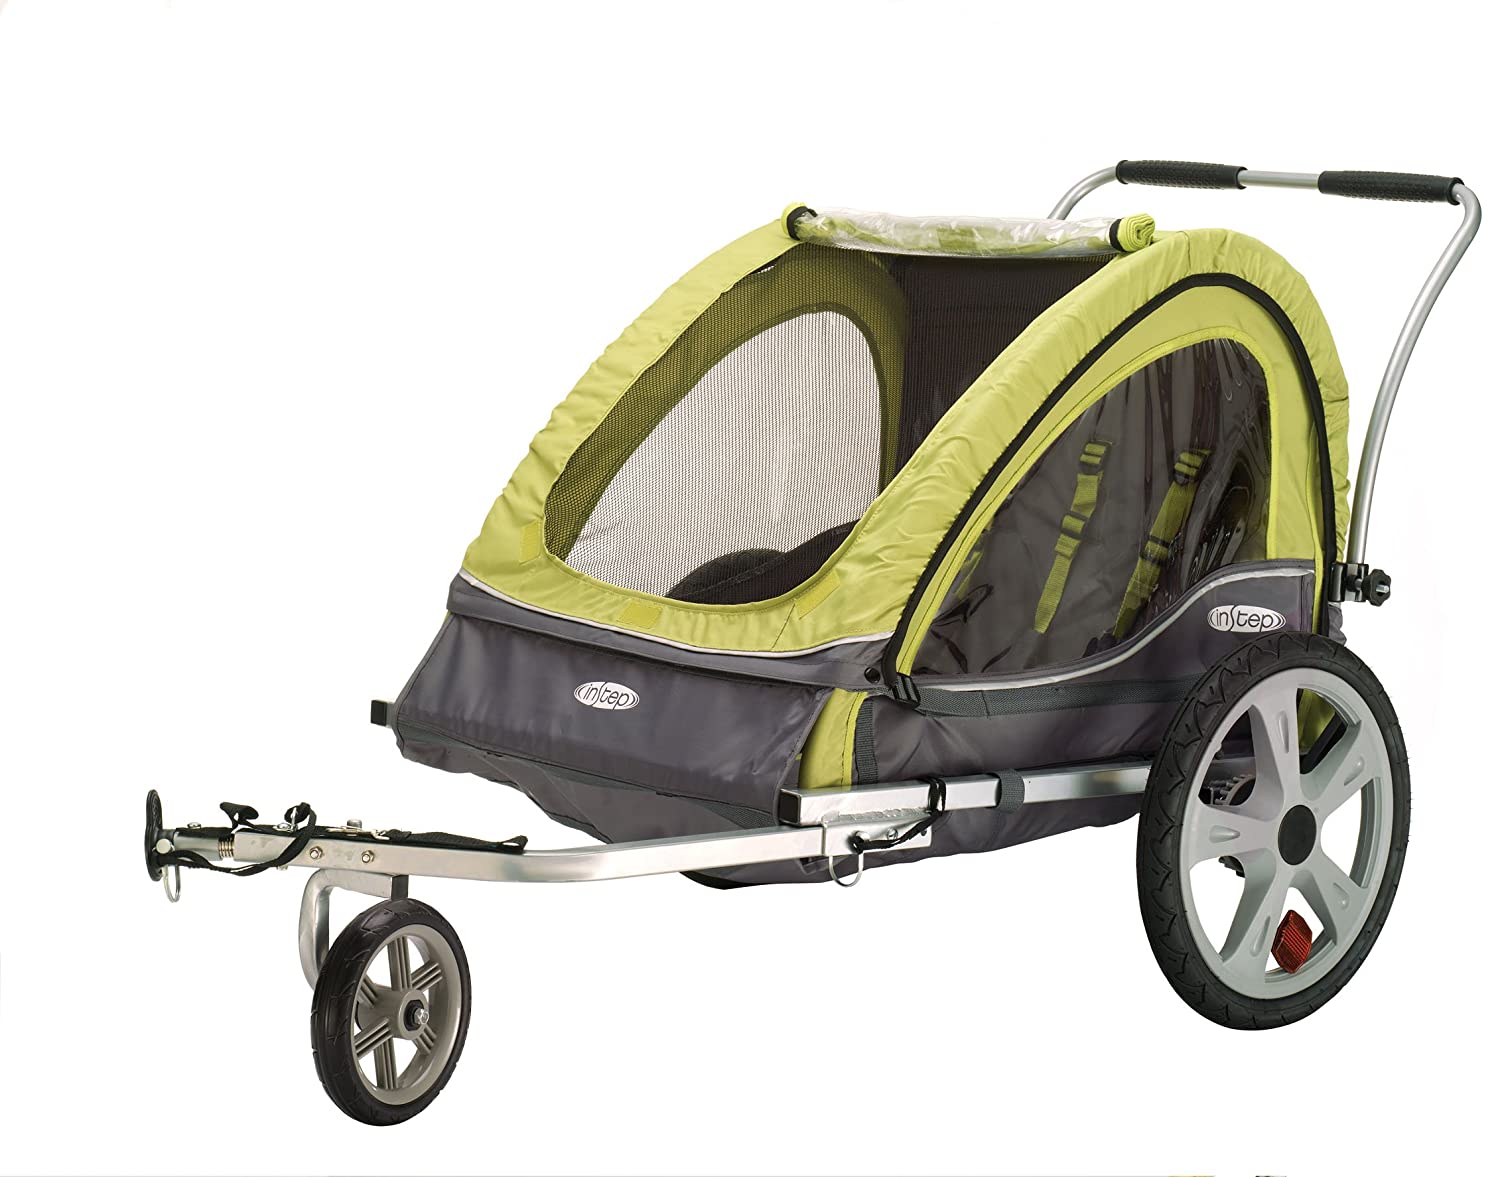 InStep Sierra Double Seat Foldable Tow Behind Bike Trailers, Converts to Stroller/Jogger, Featuring 2-in-1 Canopy and 20-Inch Wheels, for Kids and Children, Multiple Colors Available